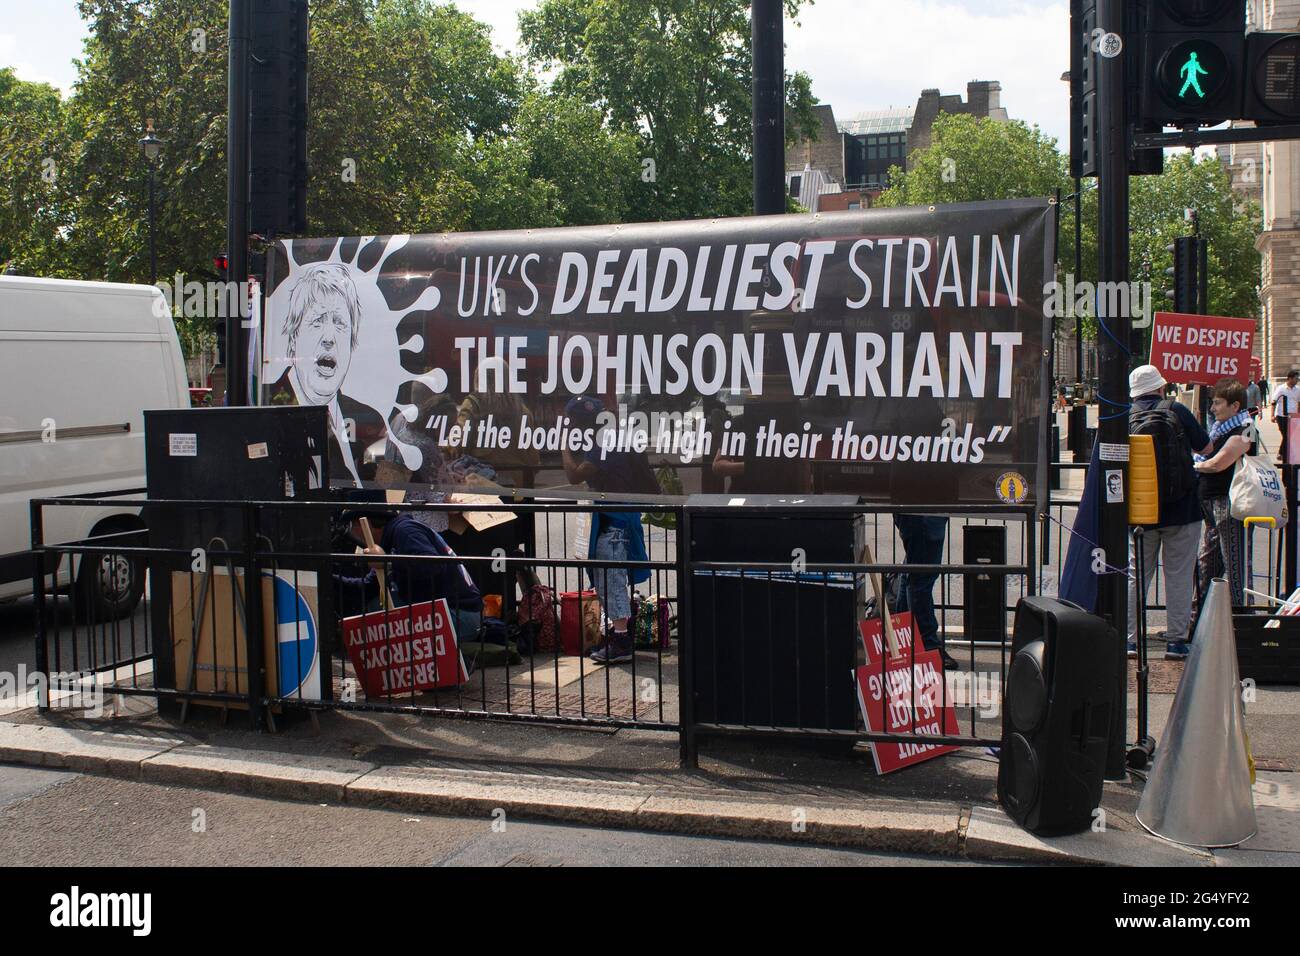 Whitehall, London, UK - 23 June 2021 - Banner along the railings at Parliament Square at the demonstration in Whitehall, London organised by SODEM  to Stock Photo